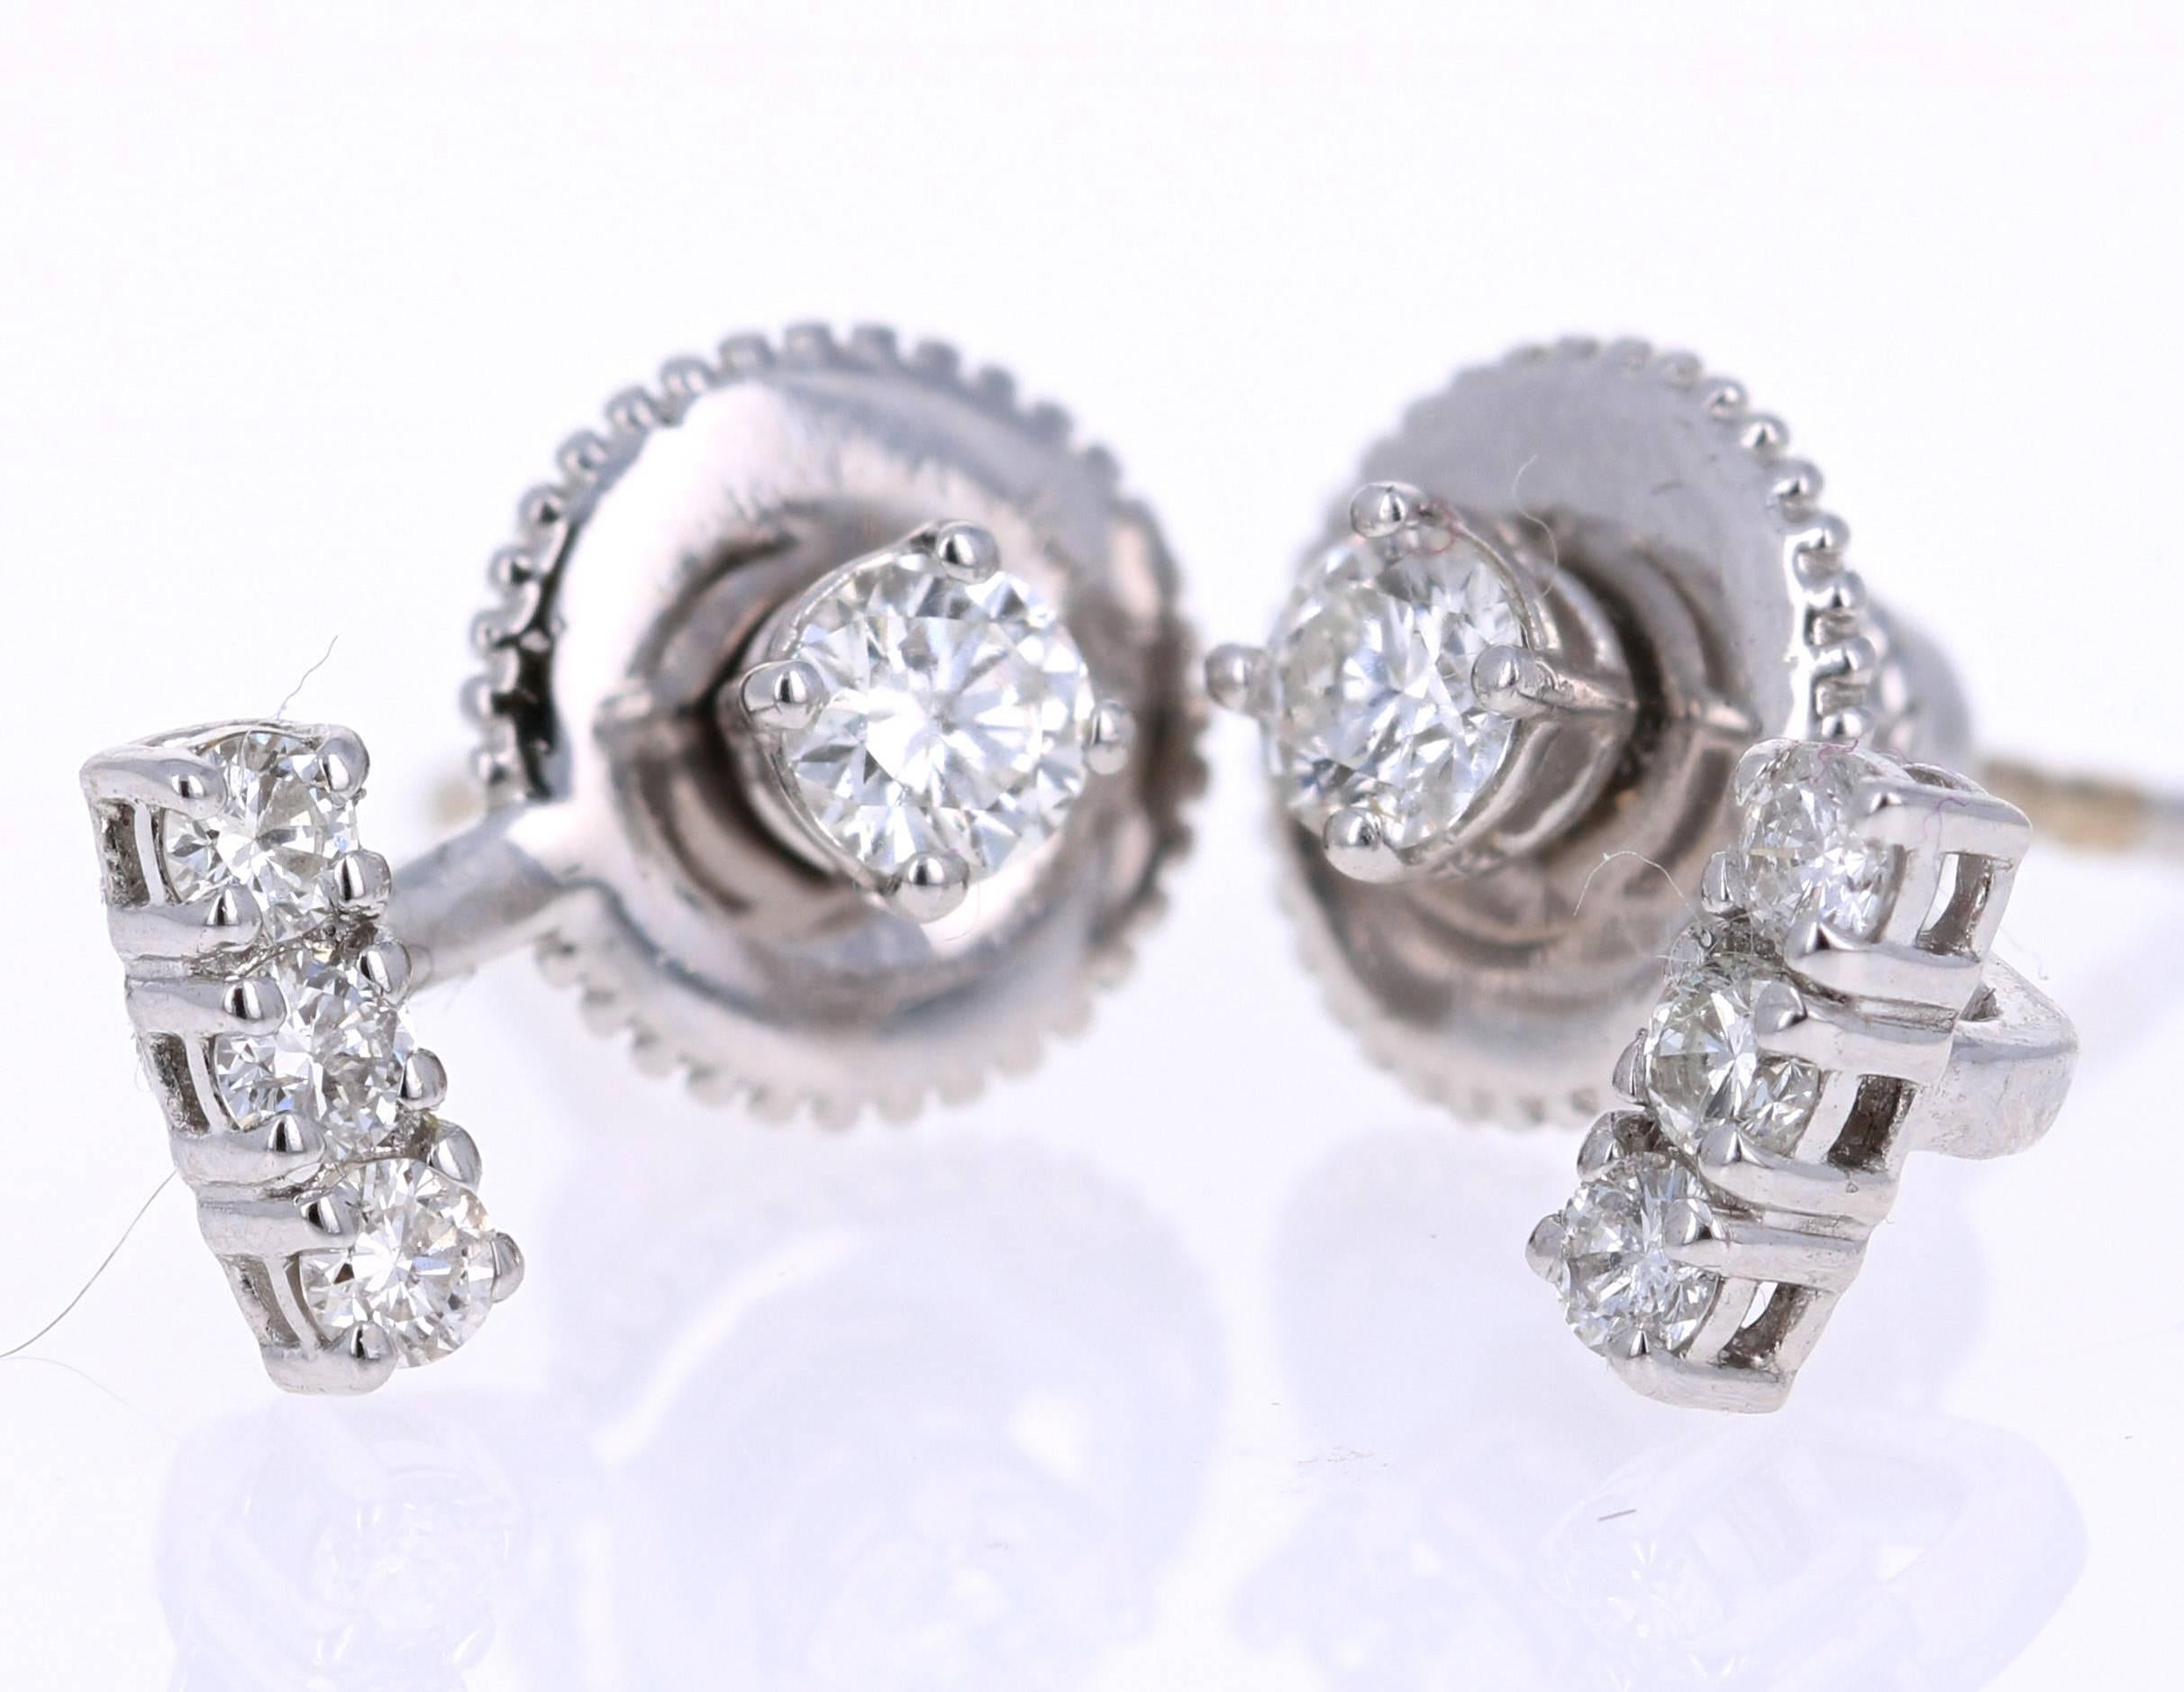 These earrings have 8 Round Cut Diamonds that weigh 0.45 carats (Clarity:  VS2, Color: F)

The backing of the earring is a standard push back. The stud can be worn alone with separate push backs. Dual use earrings! The Earrings are made in 14K White